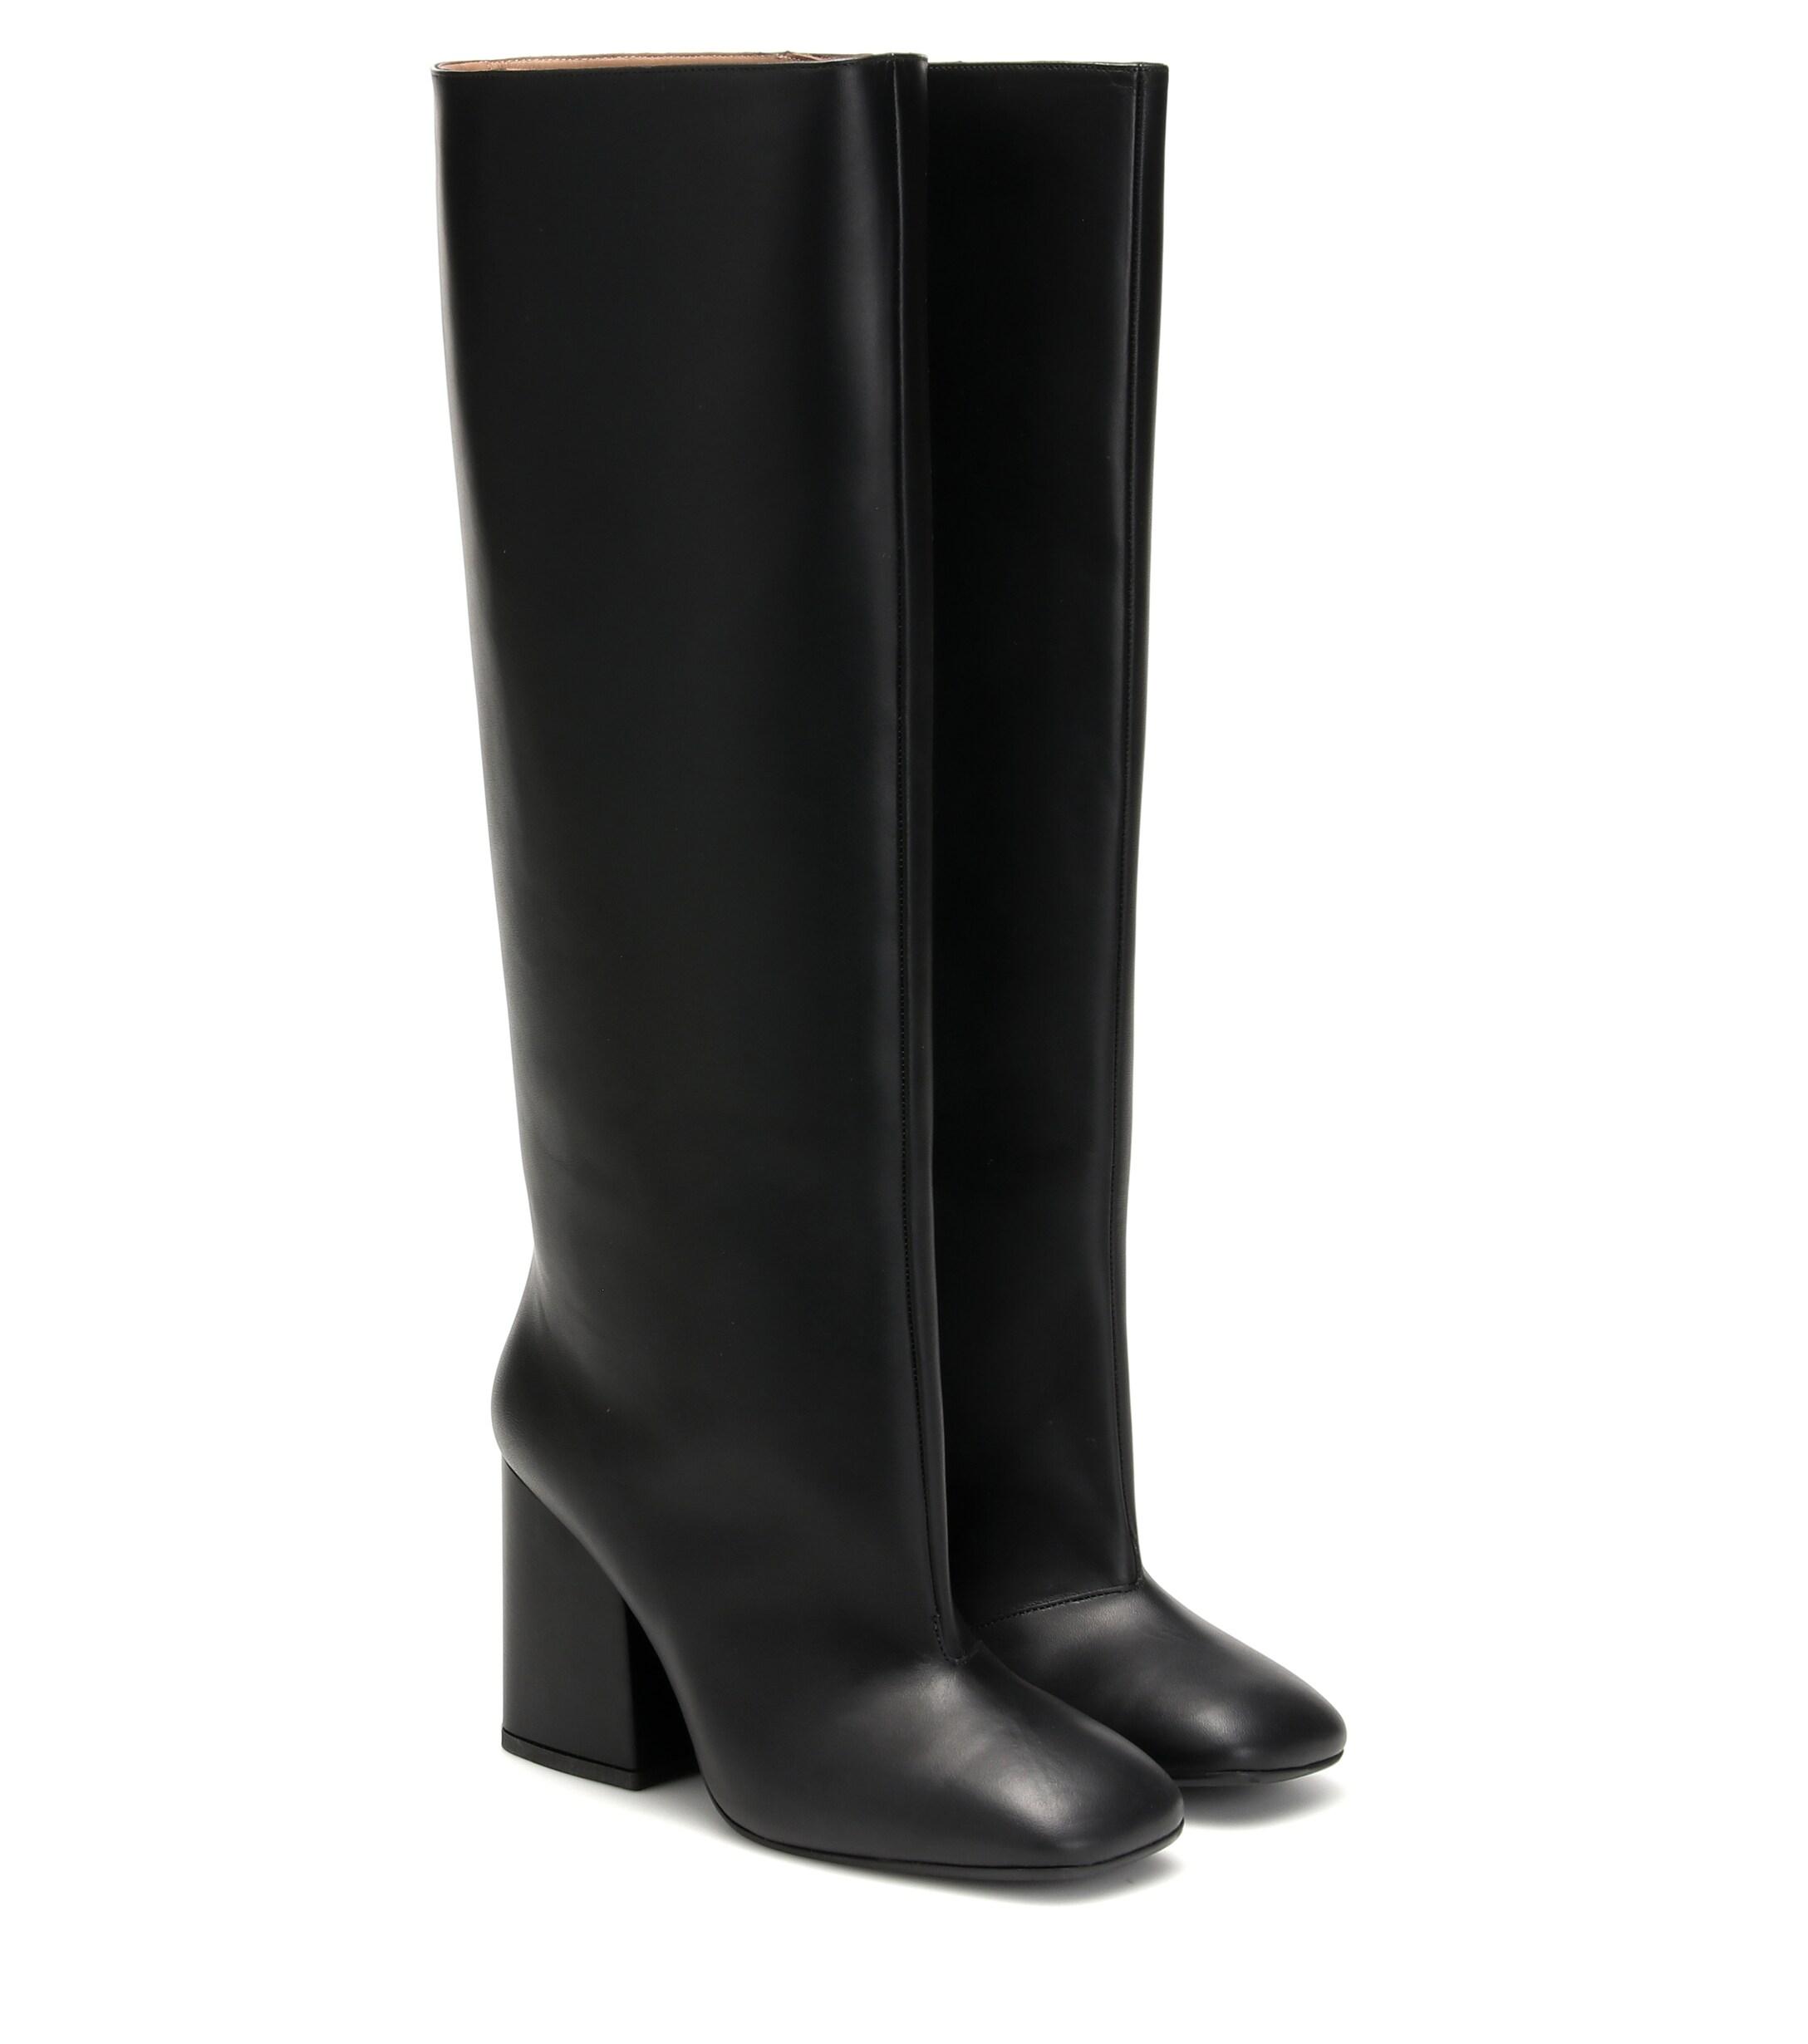 Marni Leather Boots in Black - Lyst